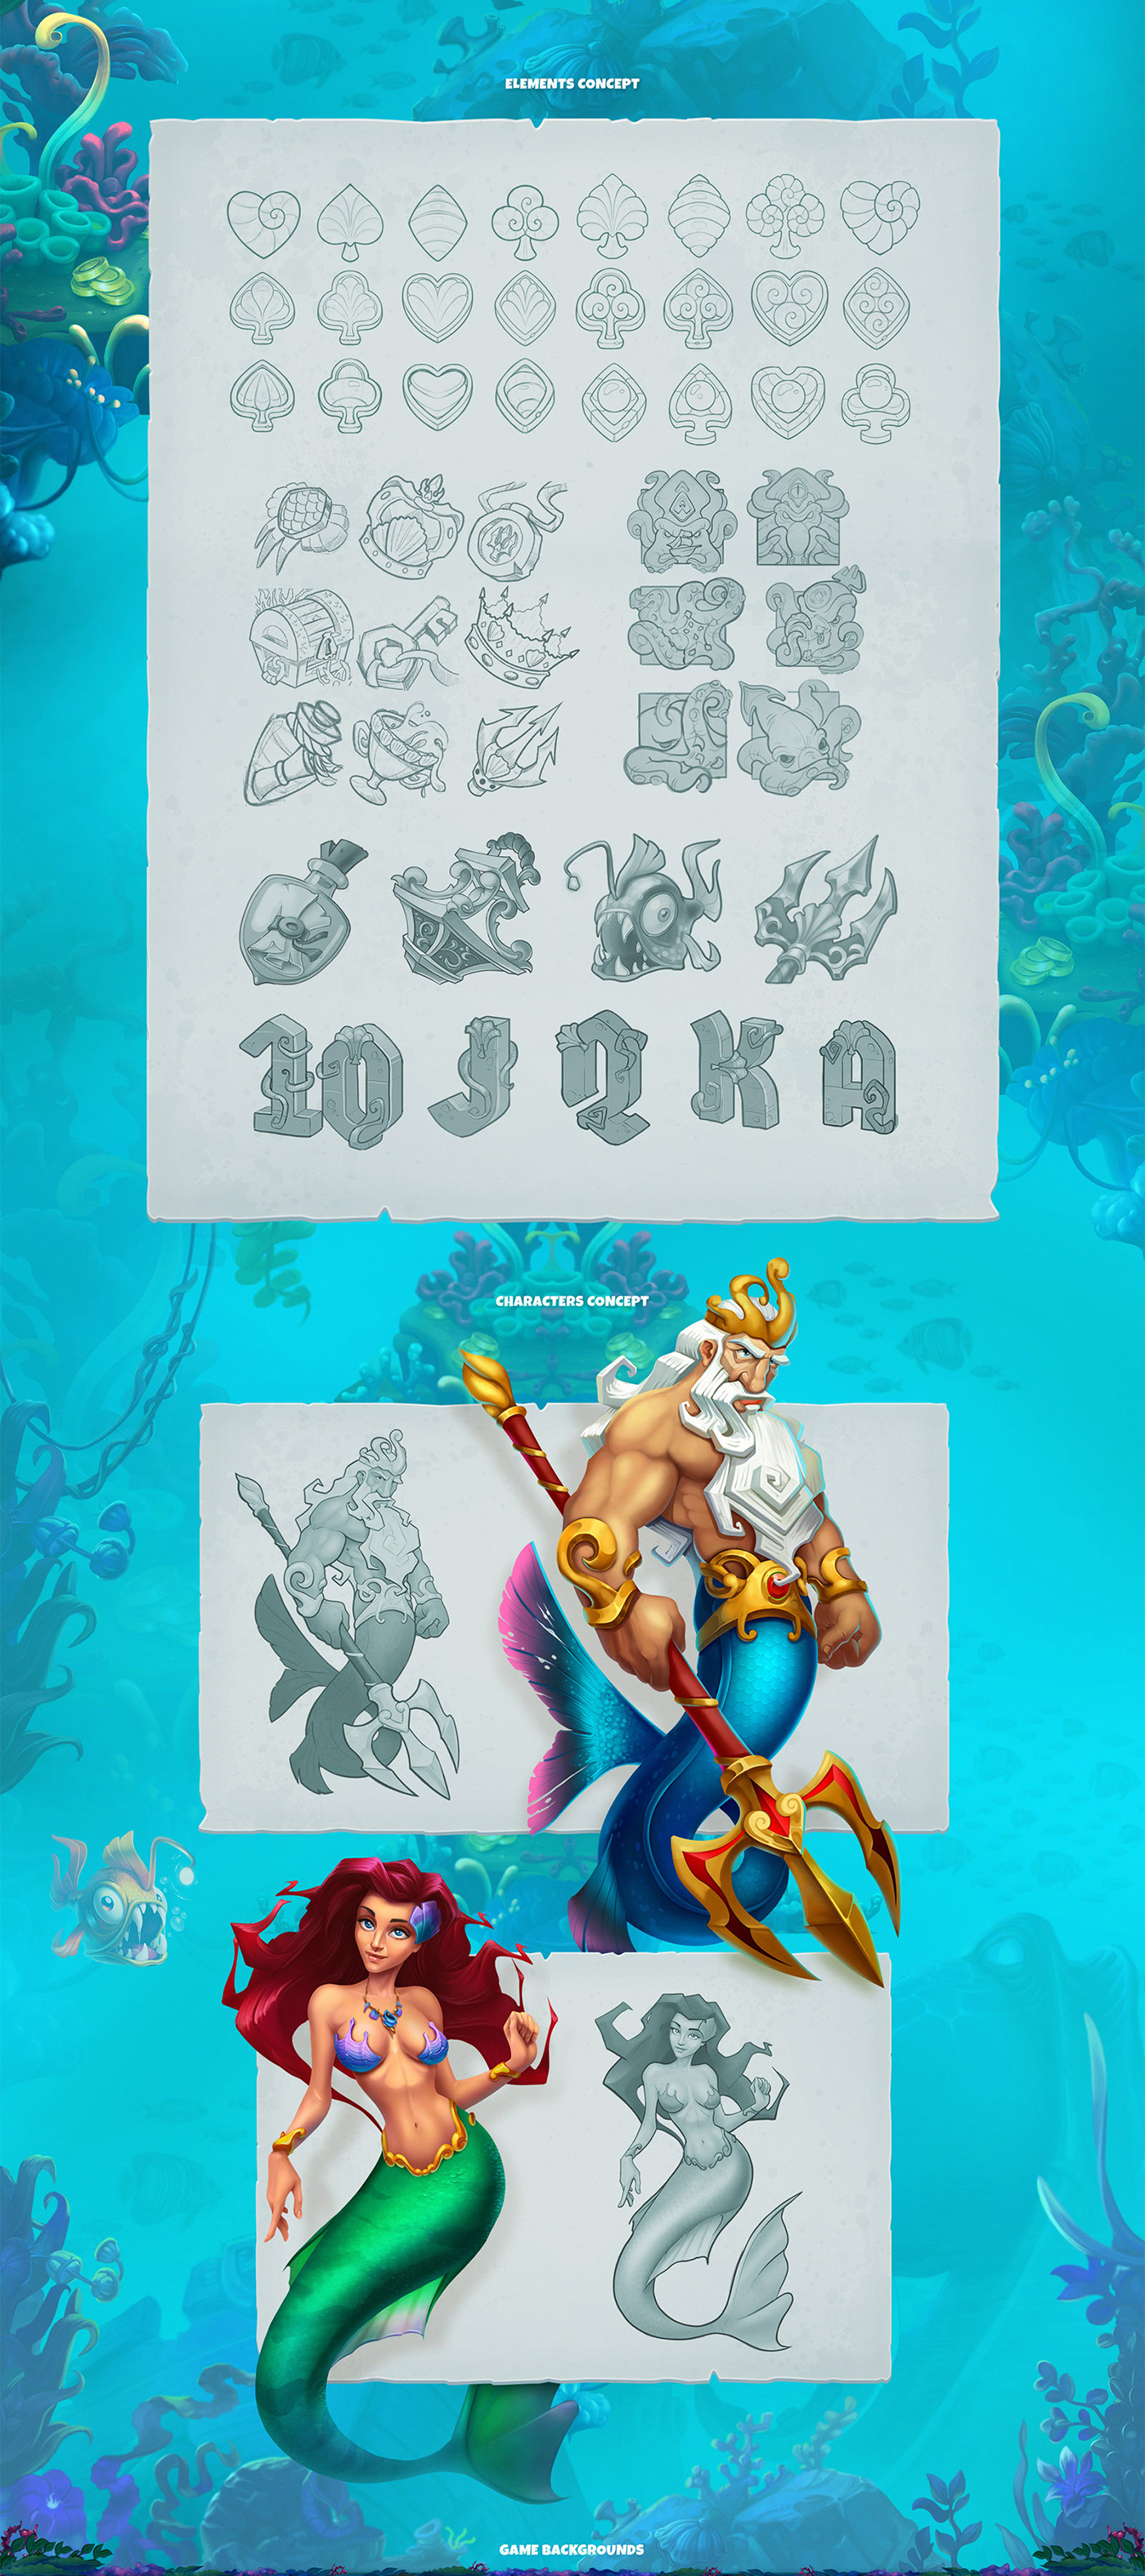 Character Concepr Art Game Art game concept Games kingdom mobile game slot slot game underwater